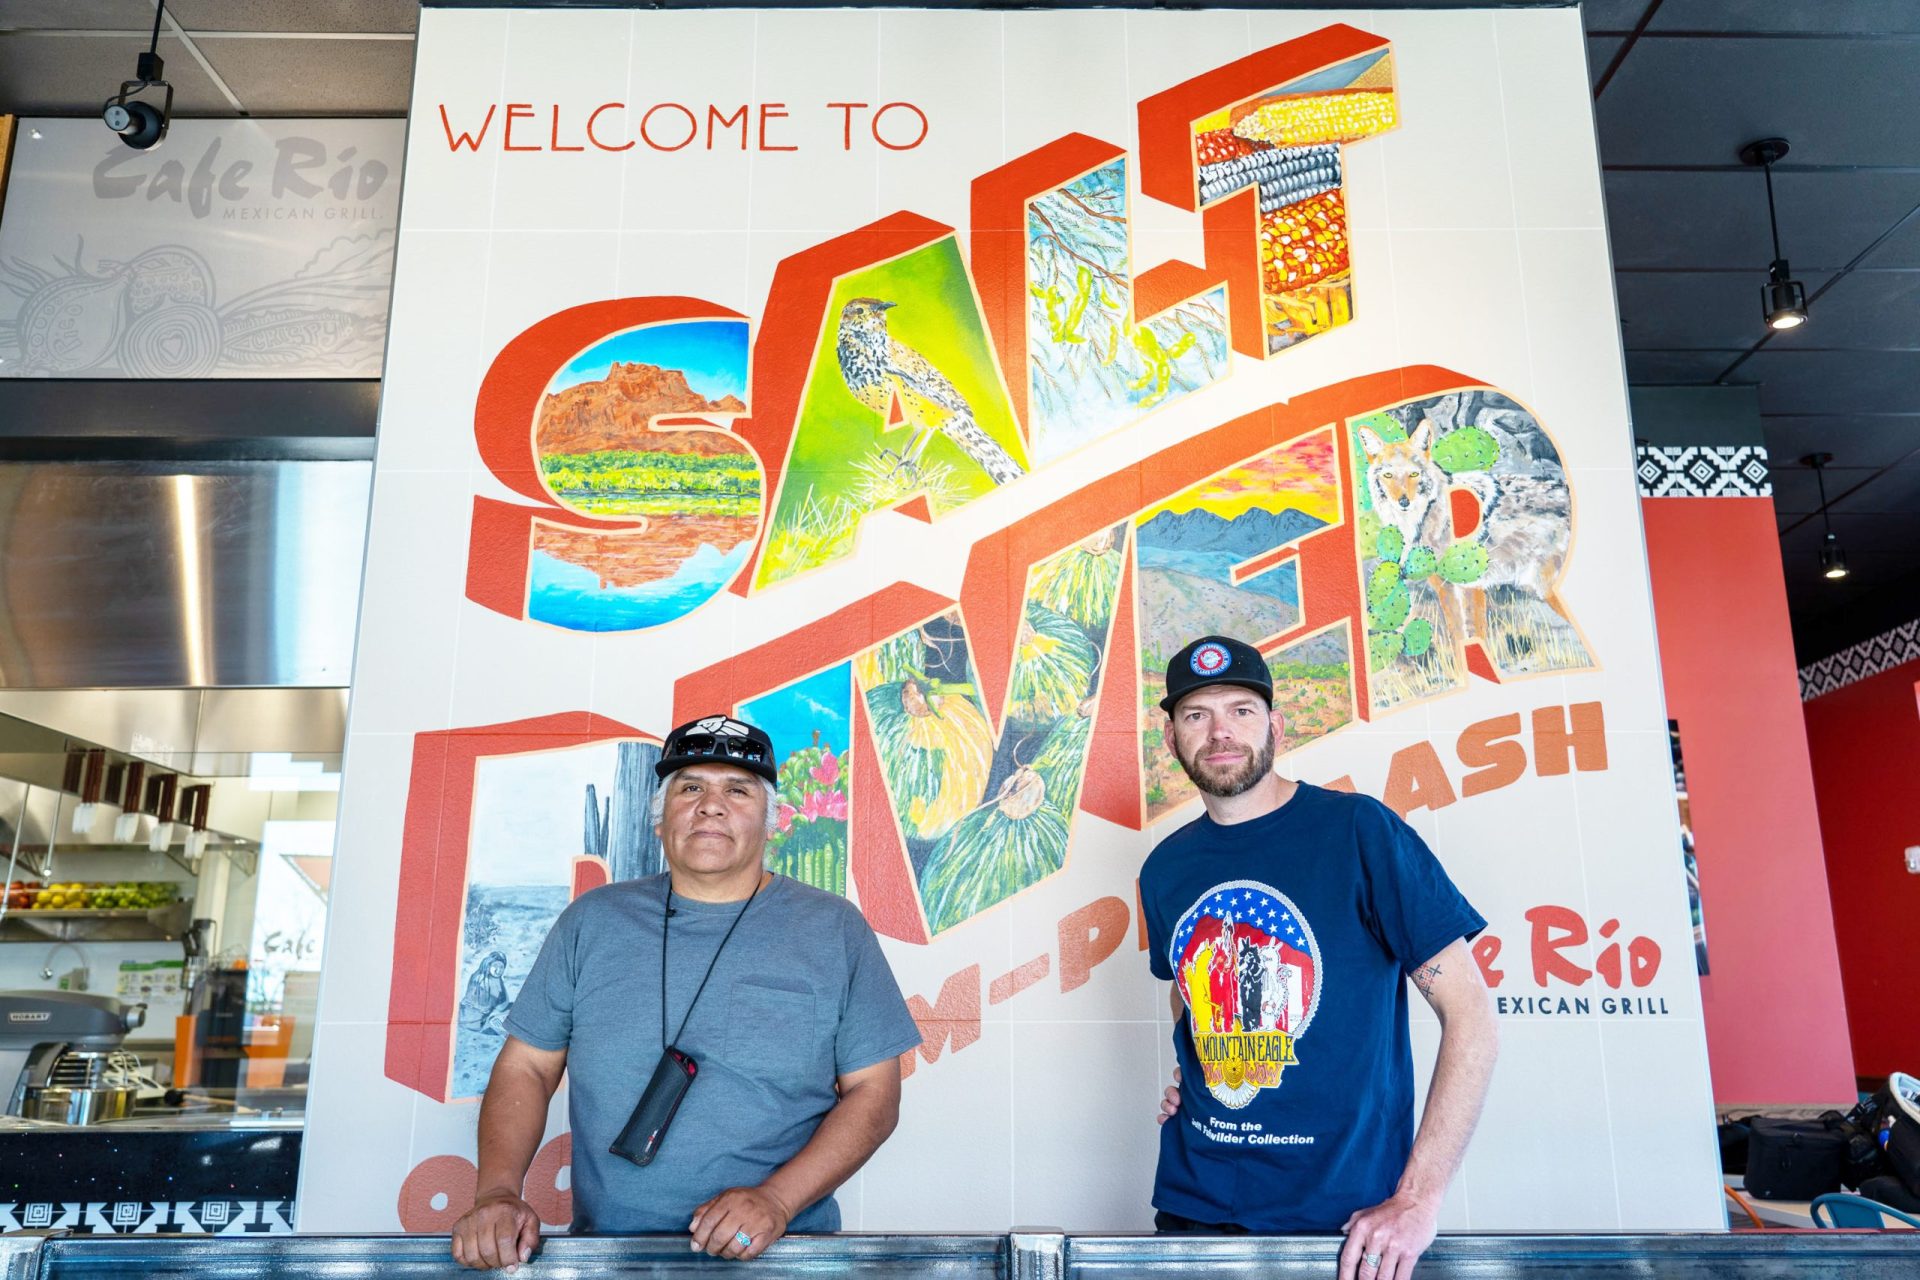 Jeffrey Fulwilder Helps Utah Muralist Connect With SRPMIC at Café Rio